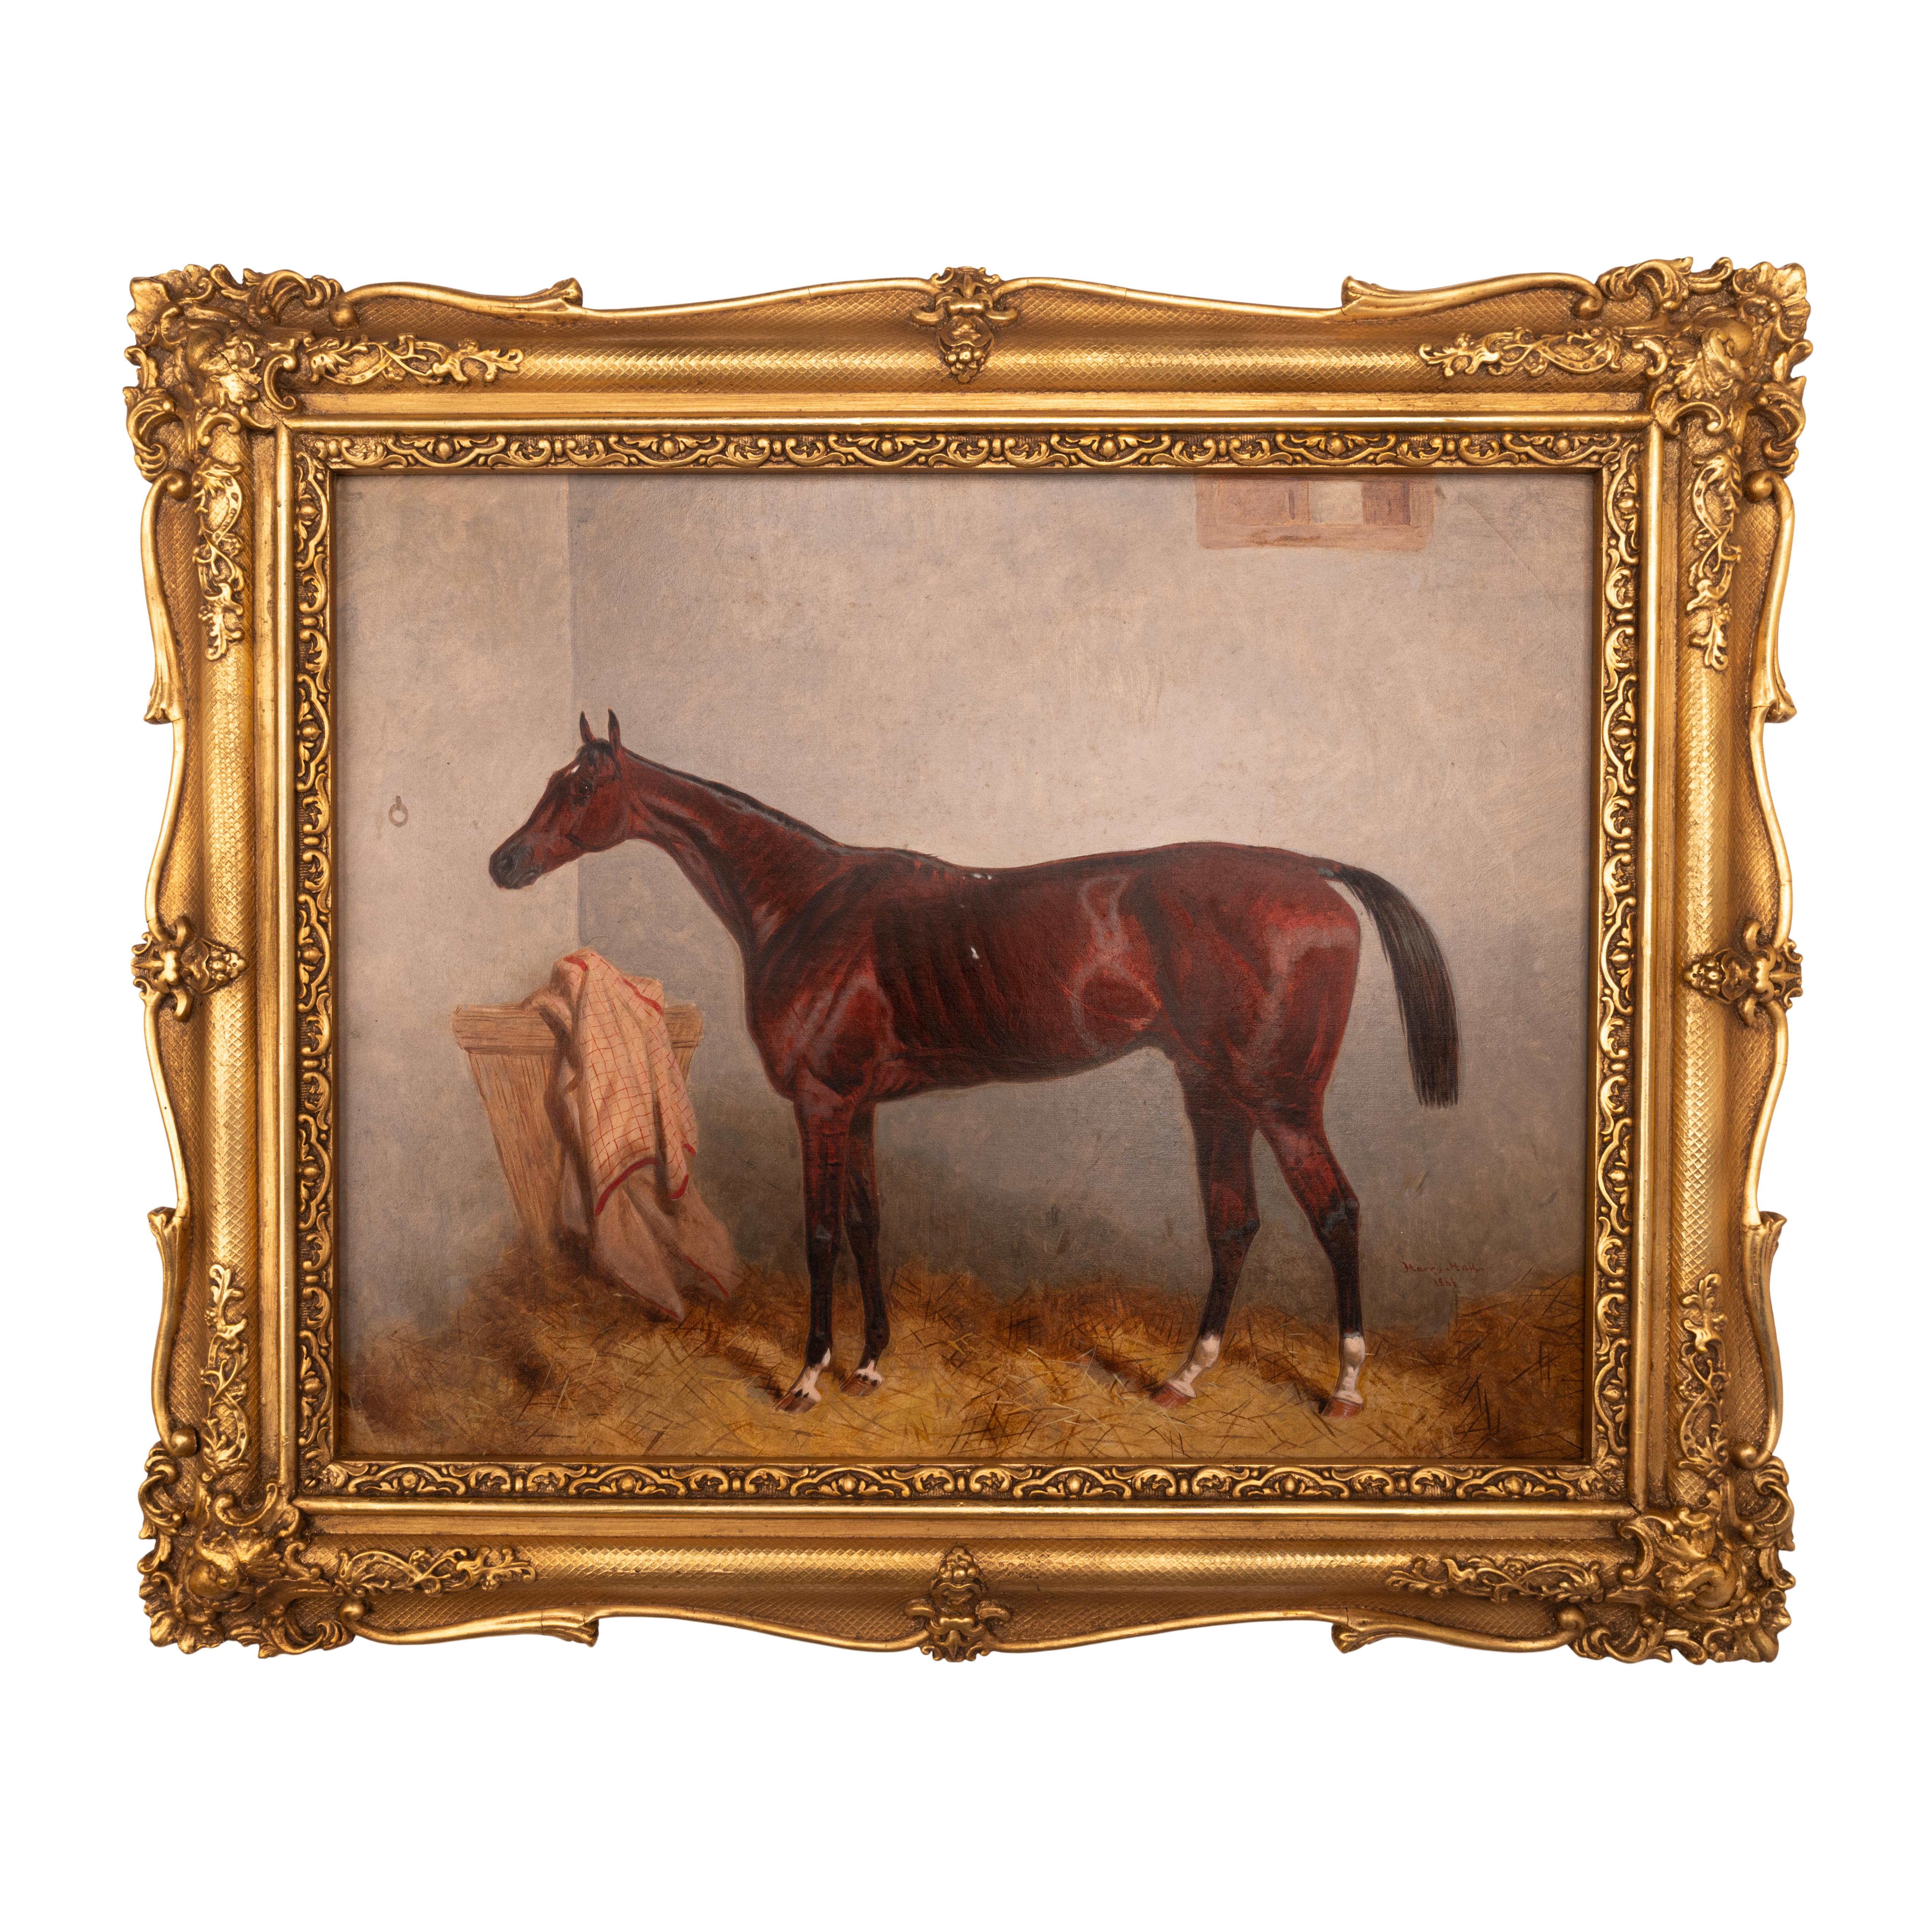 An important oil on canvas painting by the celebrated equestrian artist, Harry Hall (1814-1882), of the racehorse "Lord Lyon", 1866.
Hall was the most important equestrian artist of his day and in particular of race horses. This is a portrait of the